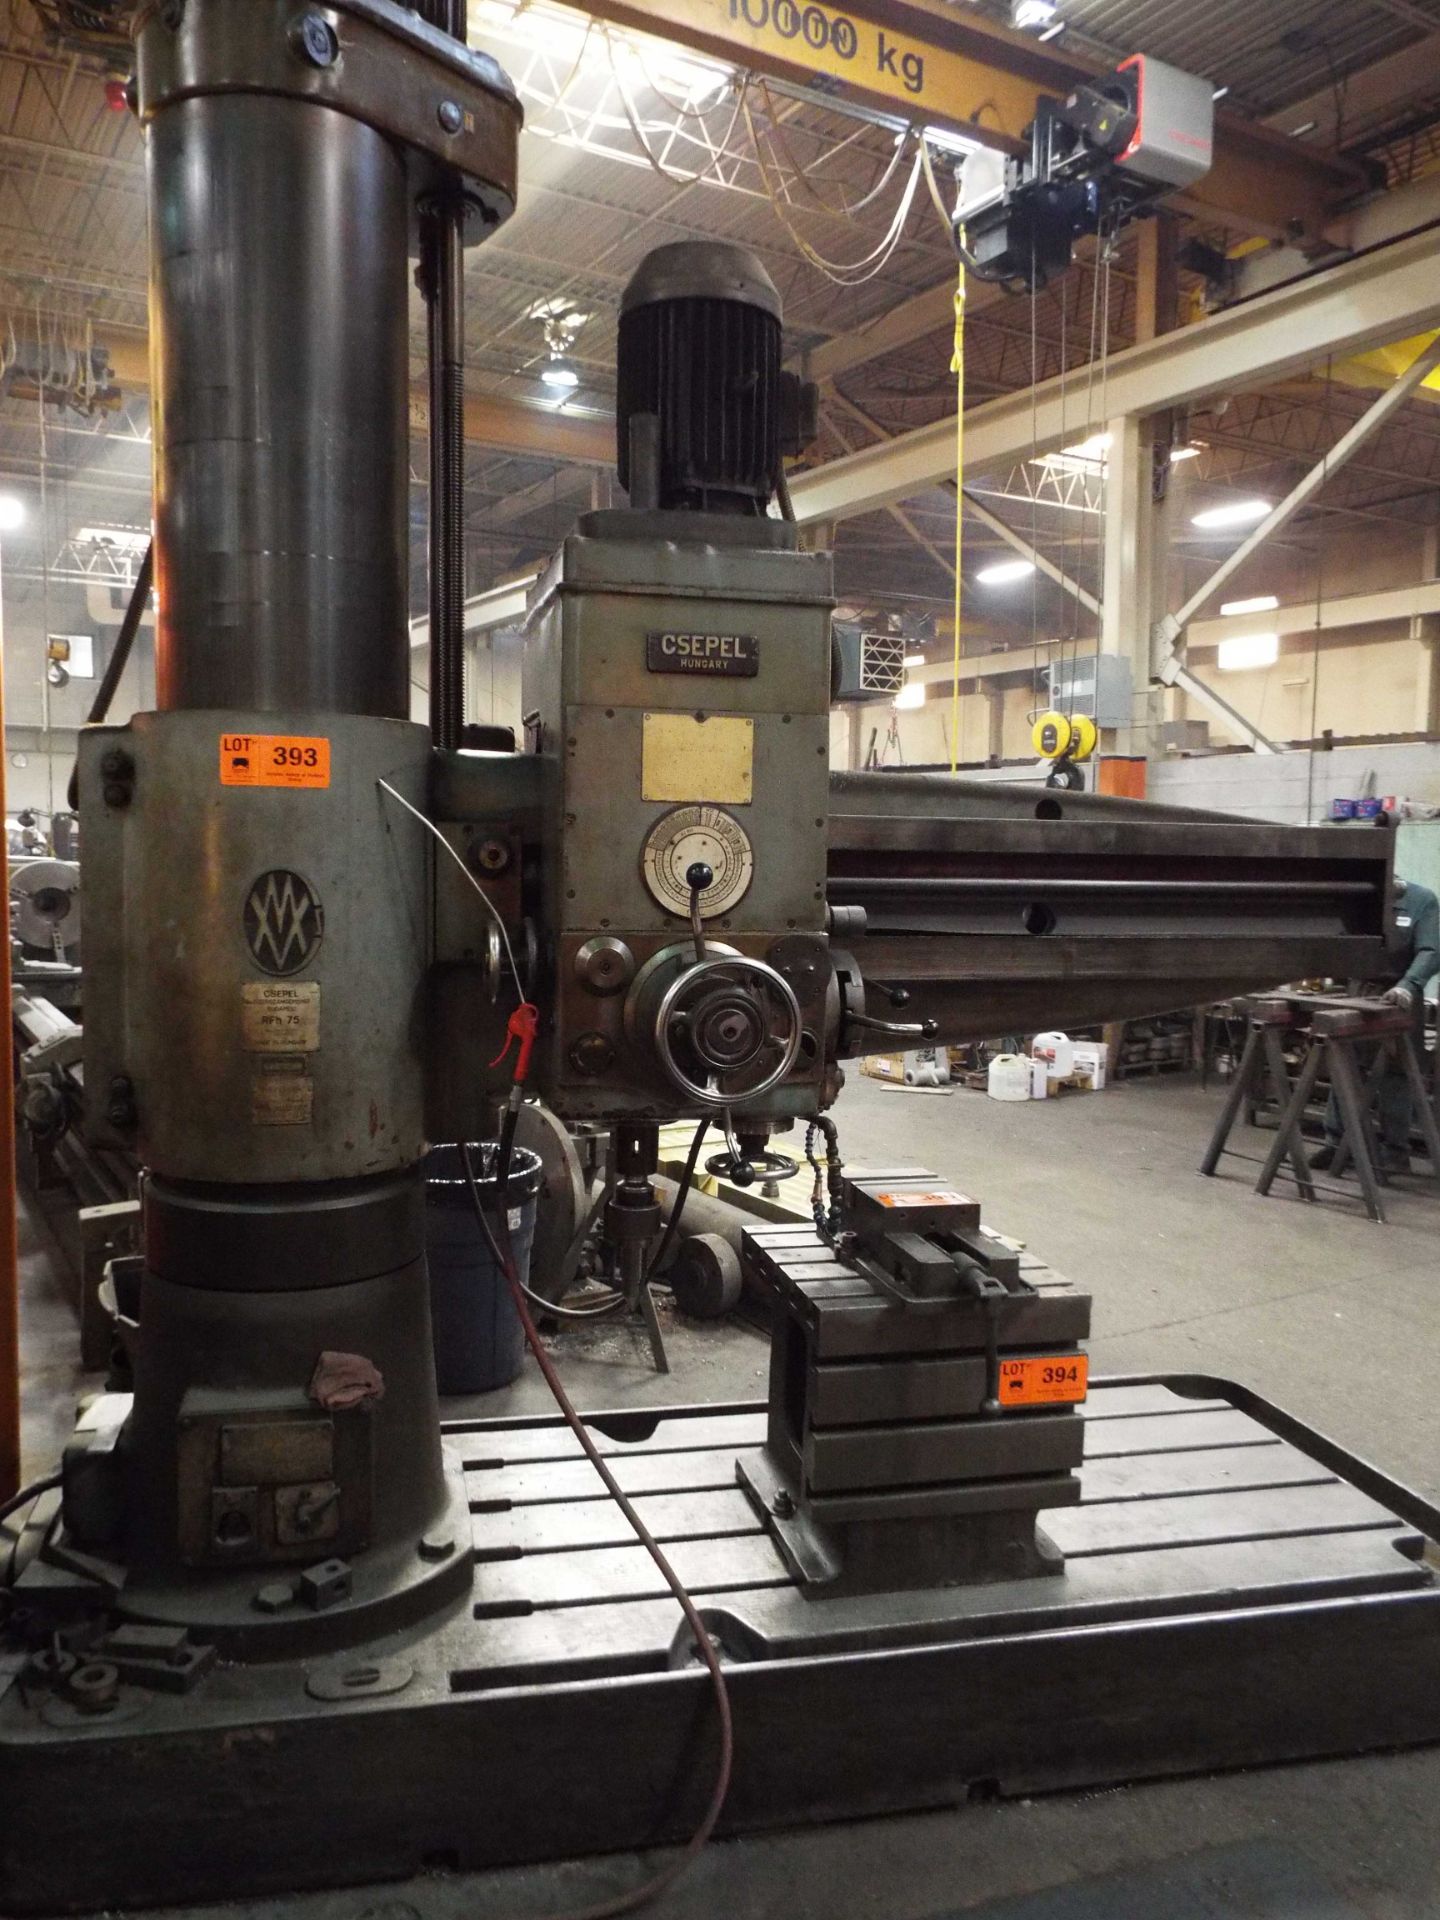 CSEPEL RFH75/1750 5' RADIAL ARM DRILL WITH SPEEDS TO 1900 RPM, S/N: 72087 (CI) (LOCATED AT 215